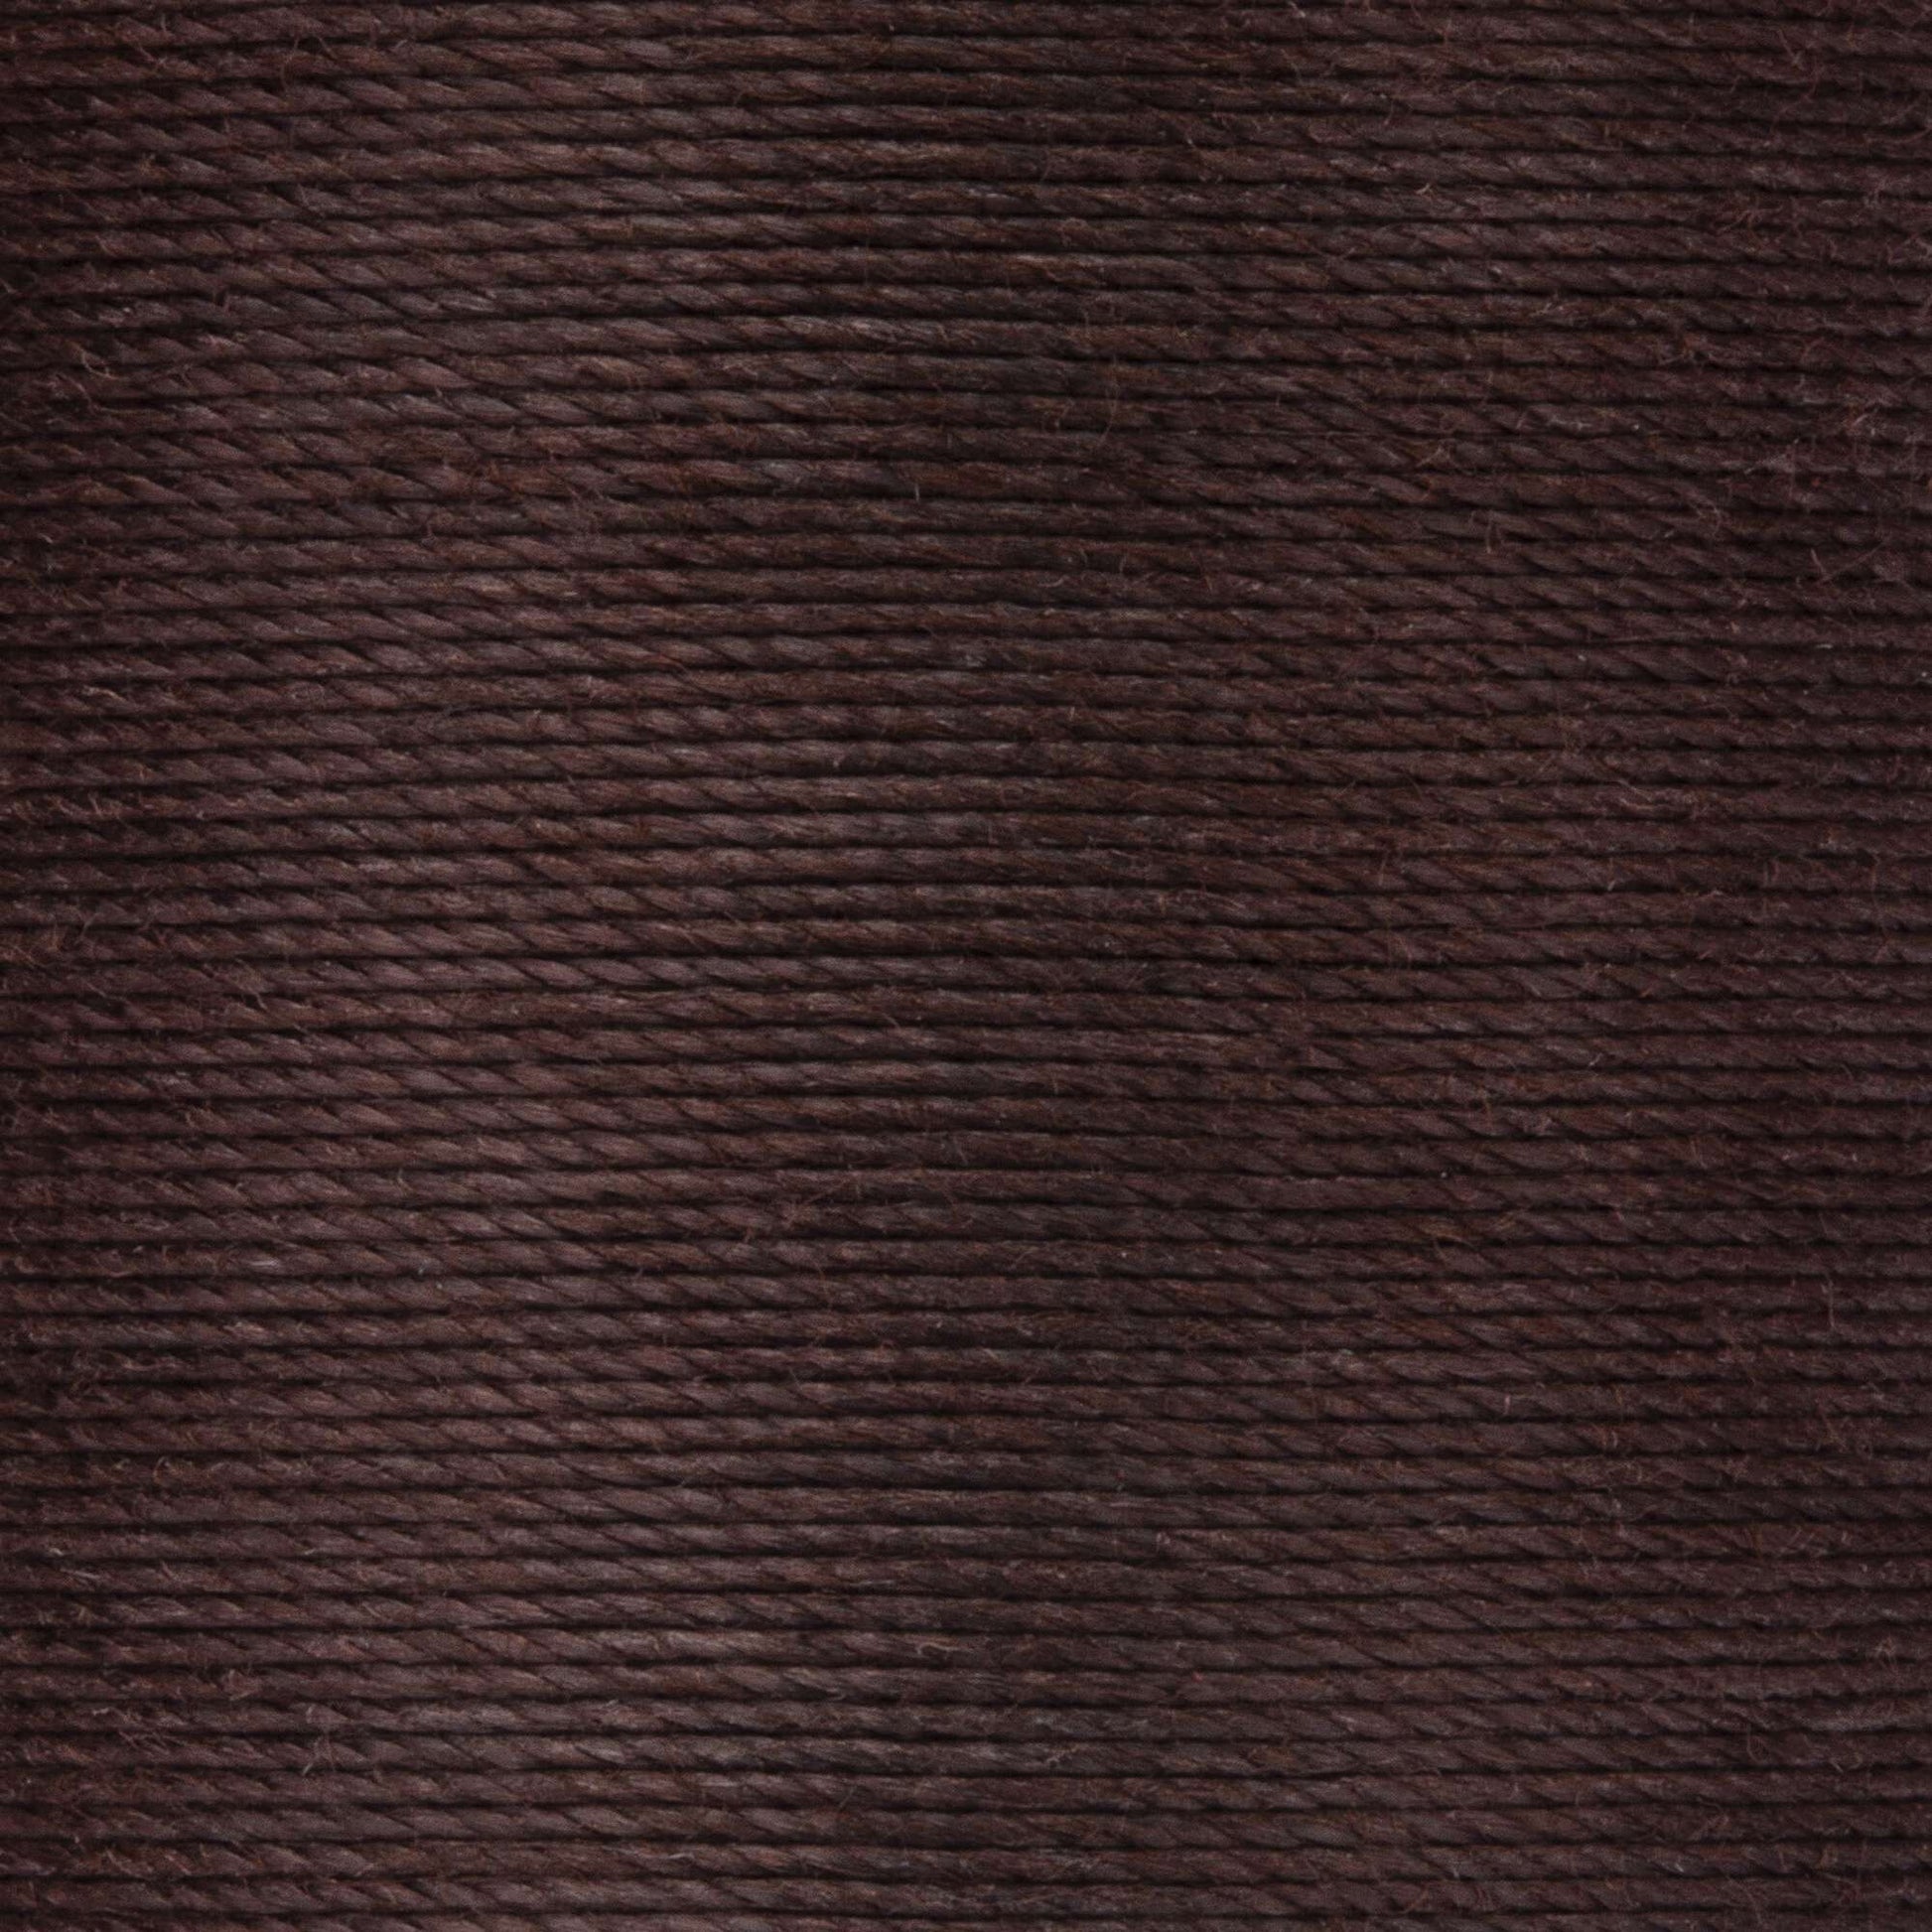 Coats Bold Hand Quilting Thread - 175yds - 175yds - Chona Brown